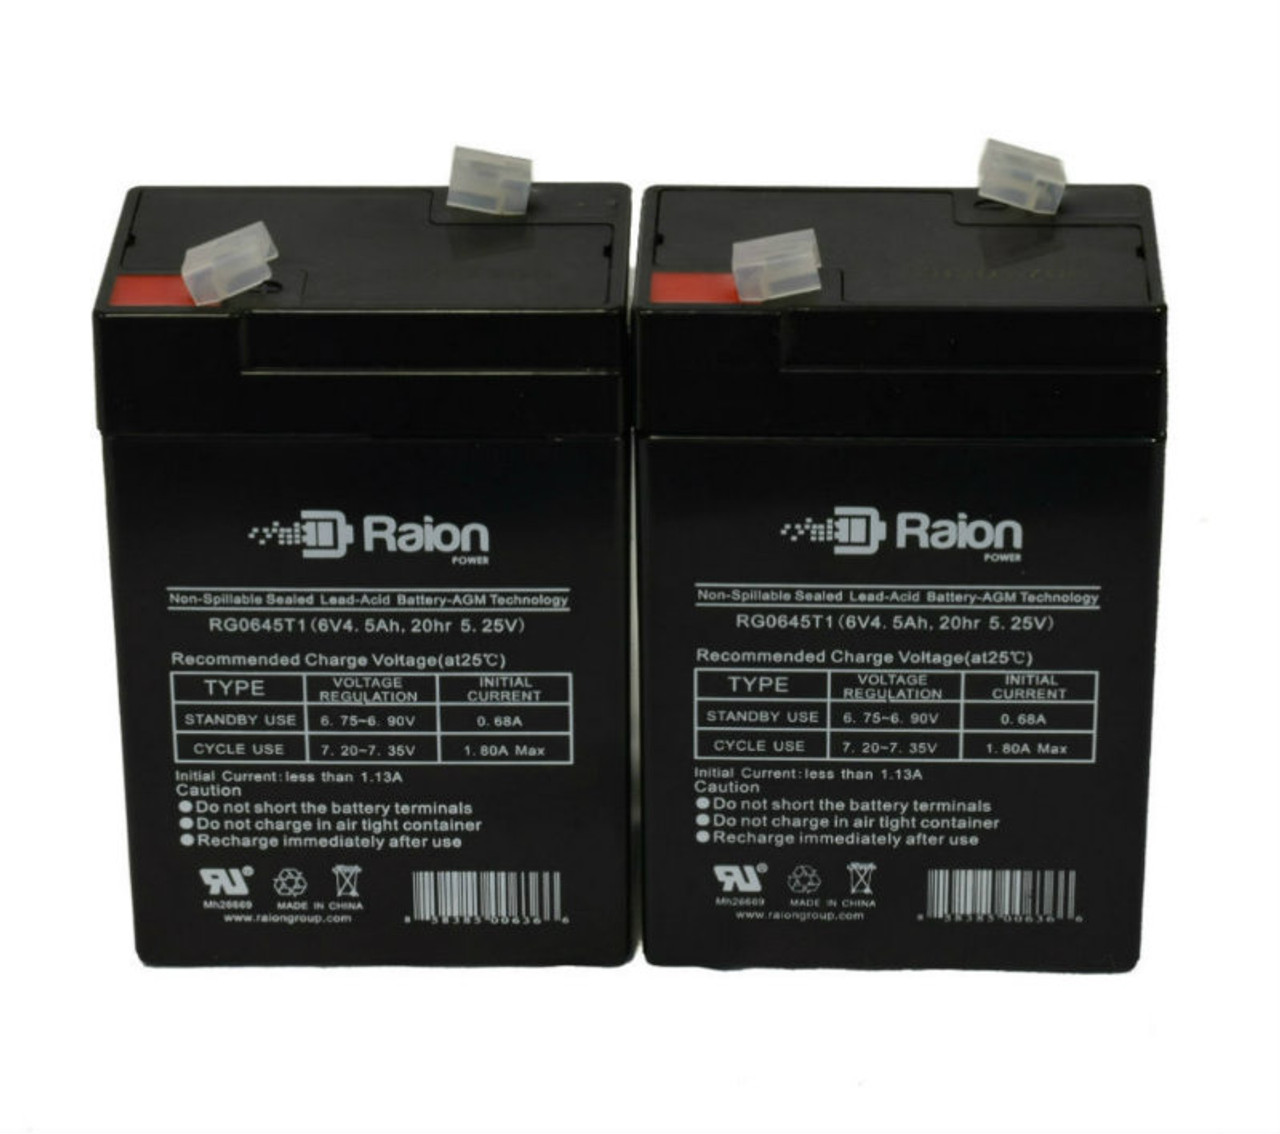 Raion Power RG0645T1 6V 4.5Ah Replacement Medical Equipment Battery for Alaris Medical Intell Pump 522 - 2 Pack